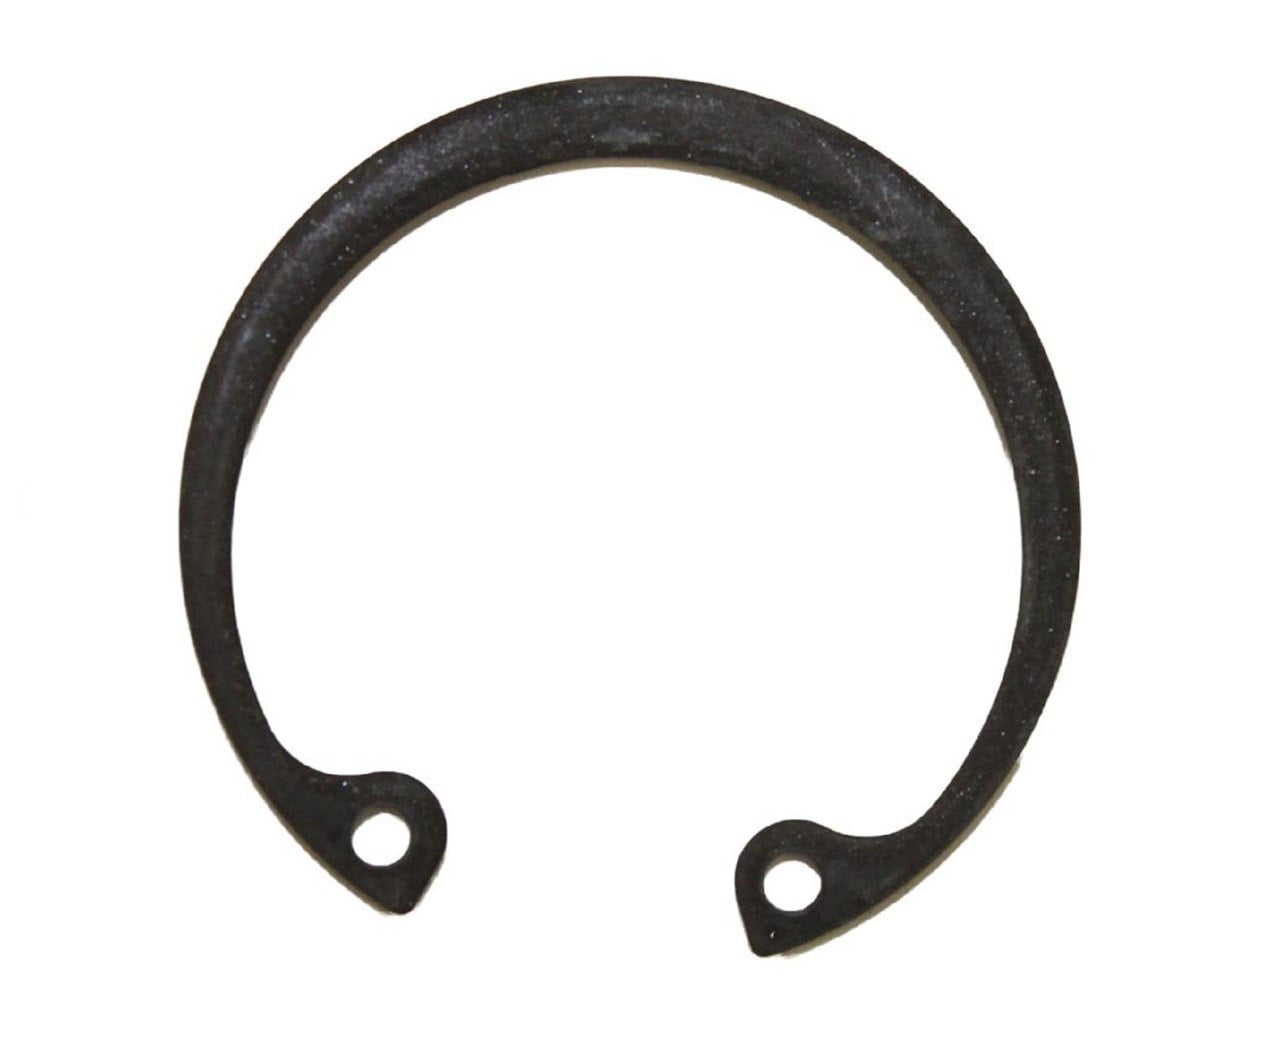 562 Vacuum Cleaner O-Ring Gasket # 122056A 122056 Kirby 505 